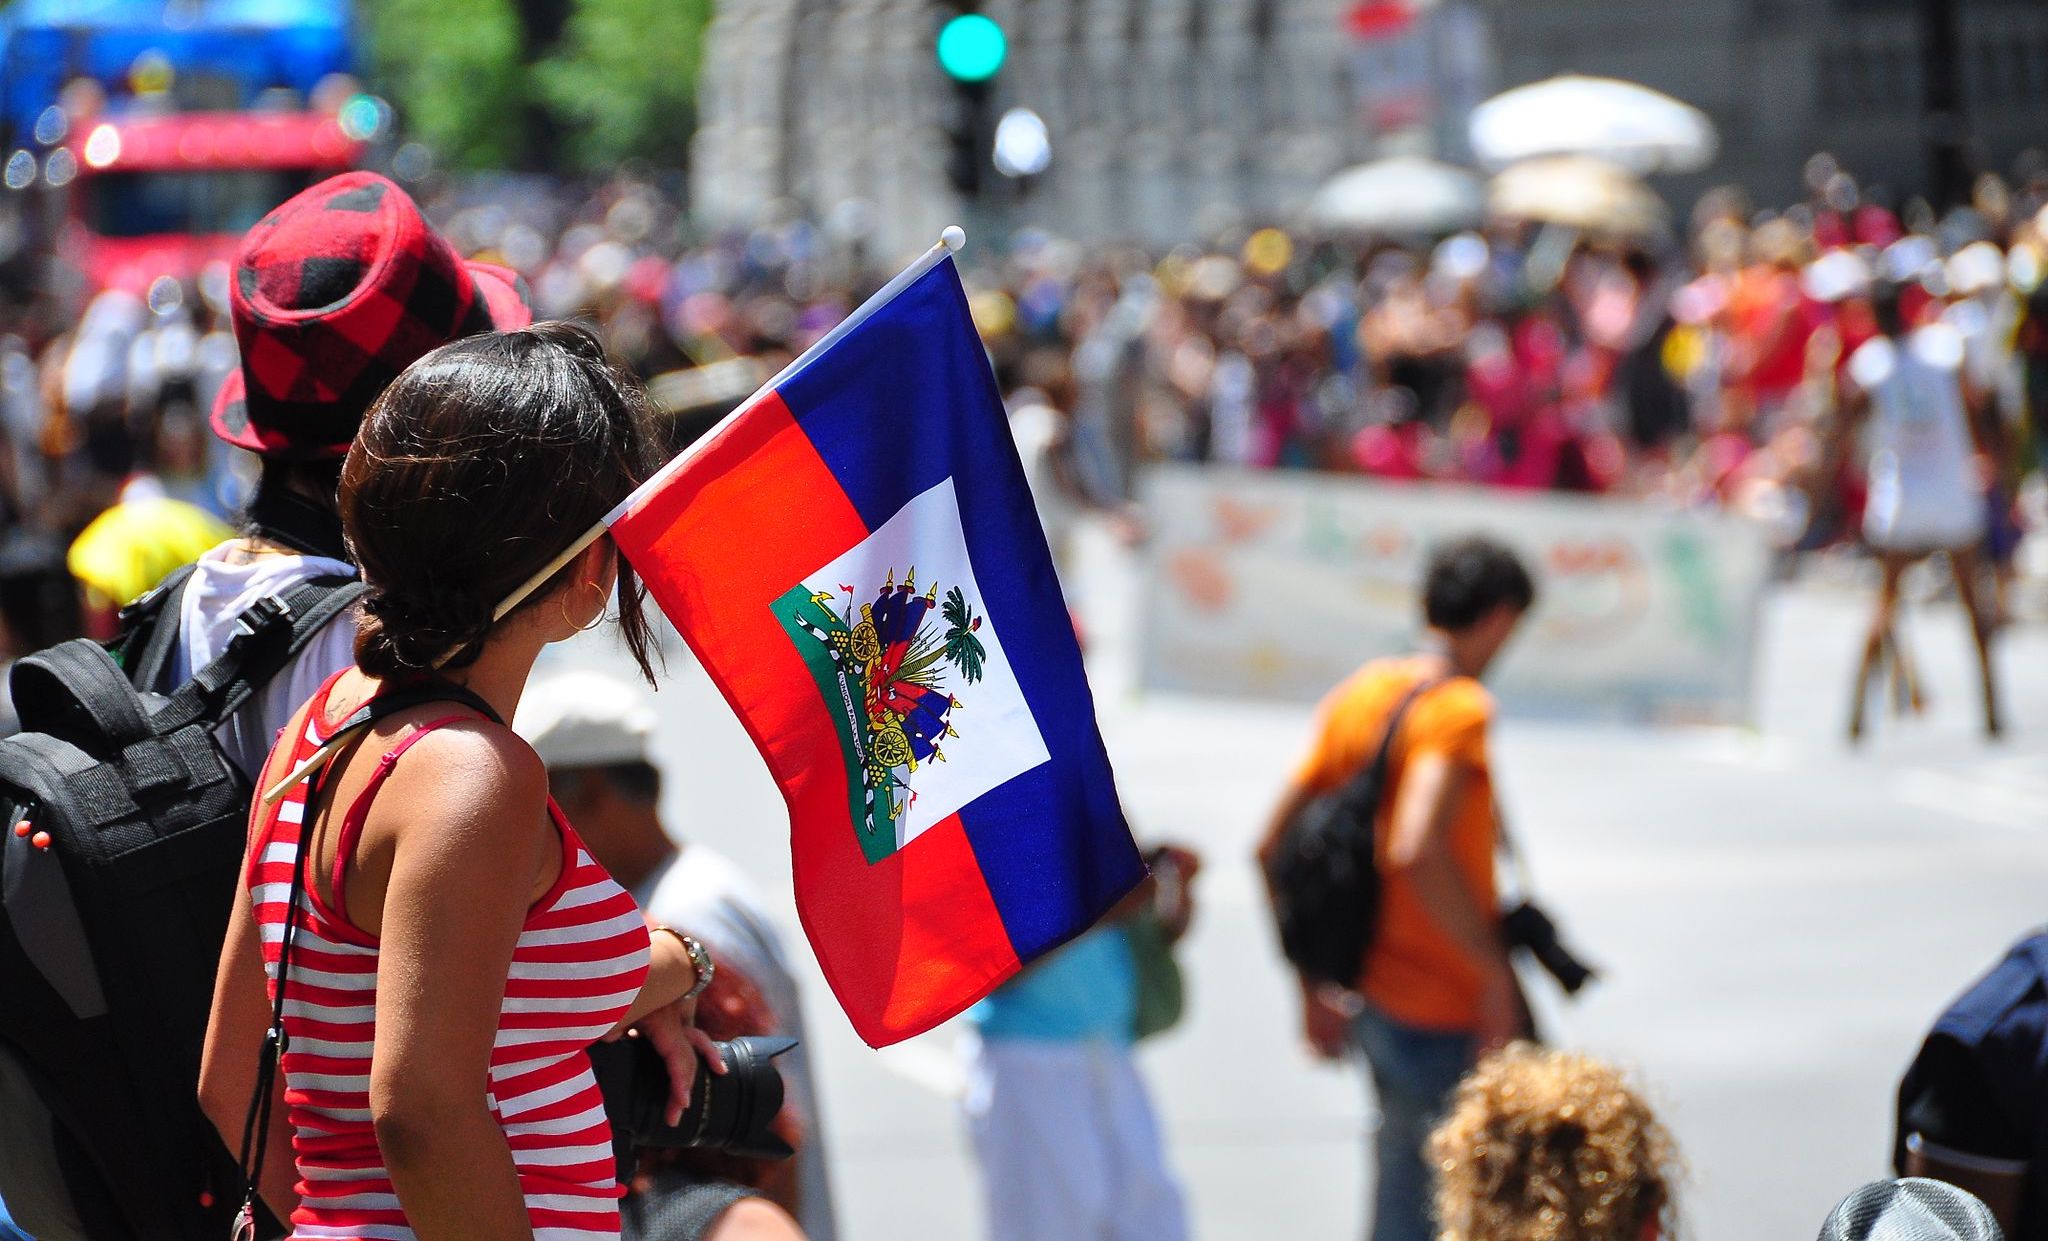 A small Haitian flag waving in front of a crowd.